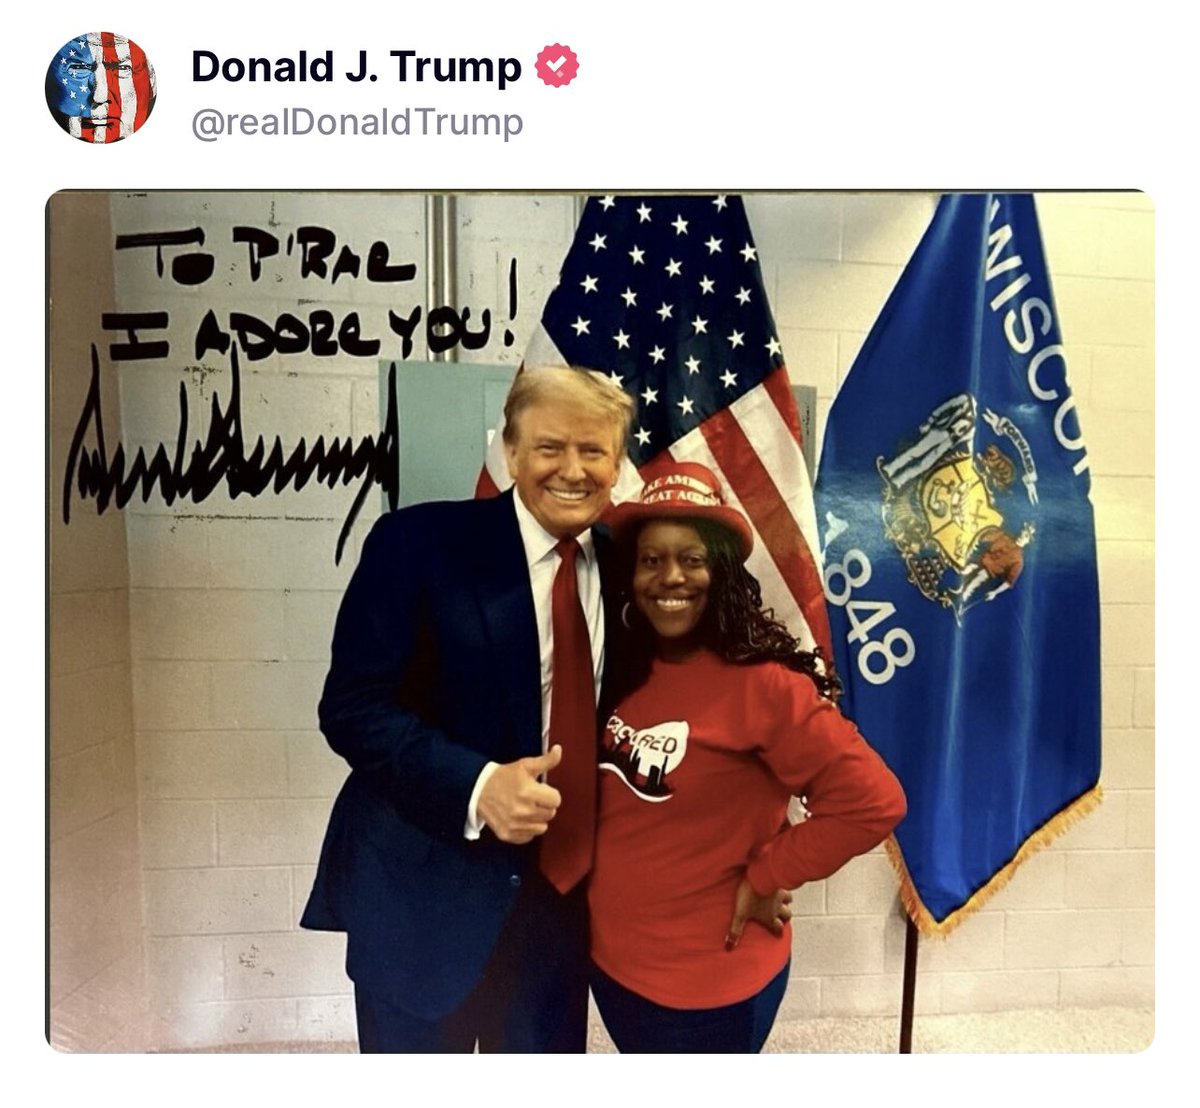 Rightful President Trump just posted this. The mainstream media want you to believe Trump is a racist. Sure would be a shame if everyone shared this post and it went viral!